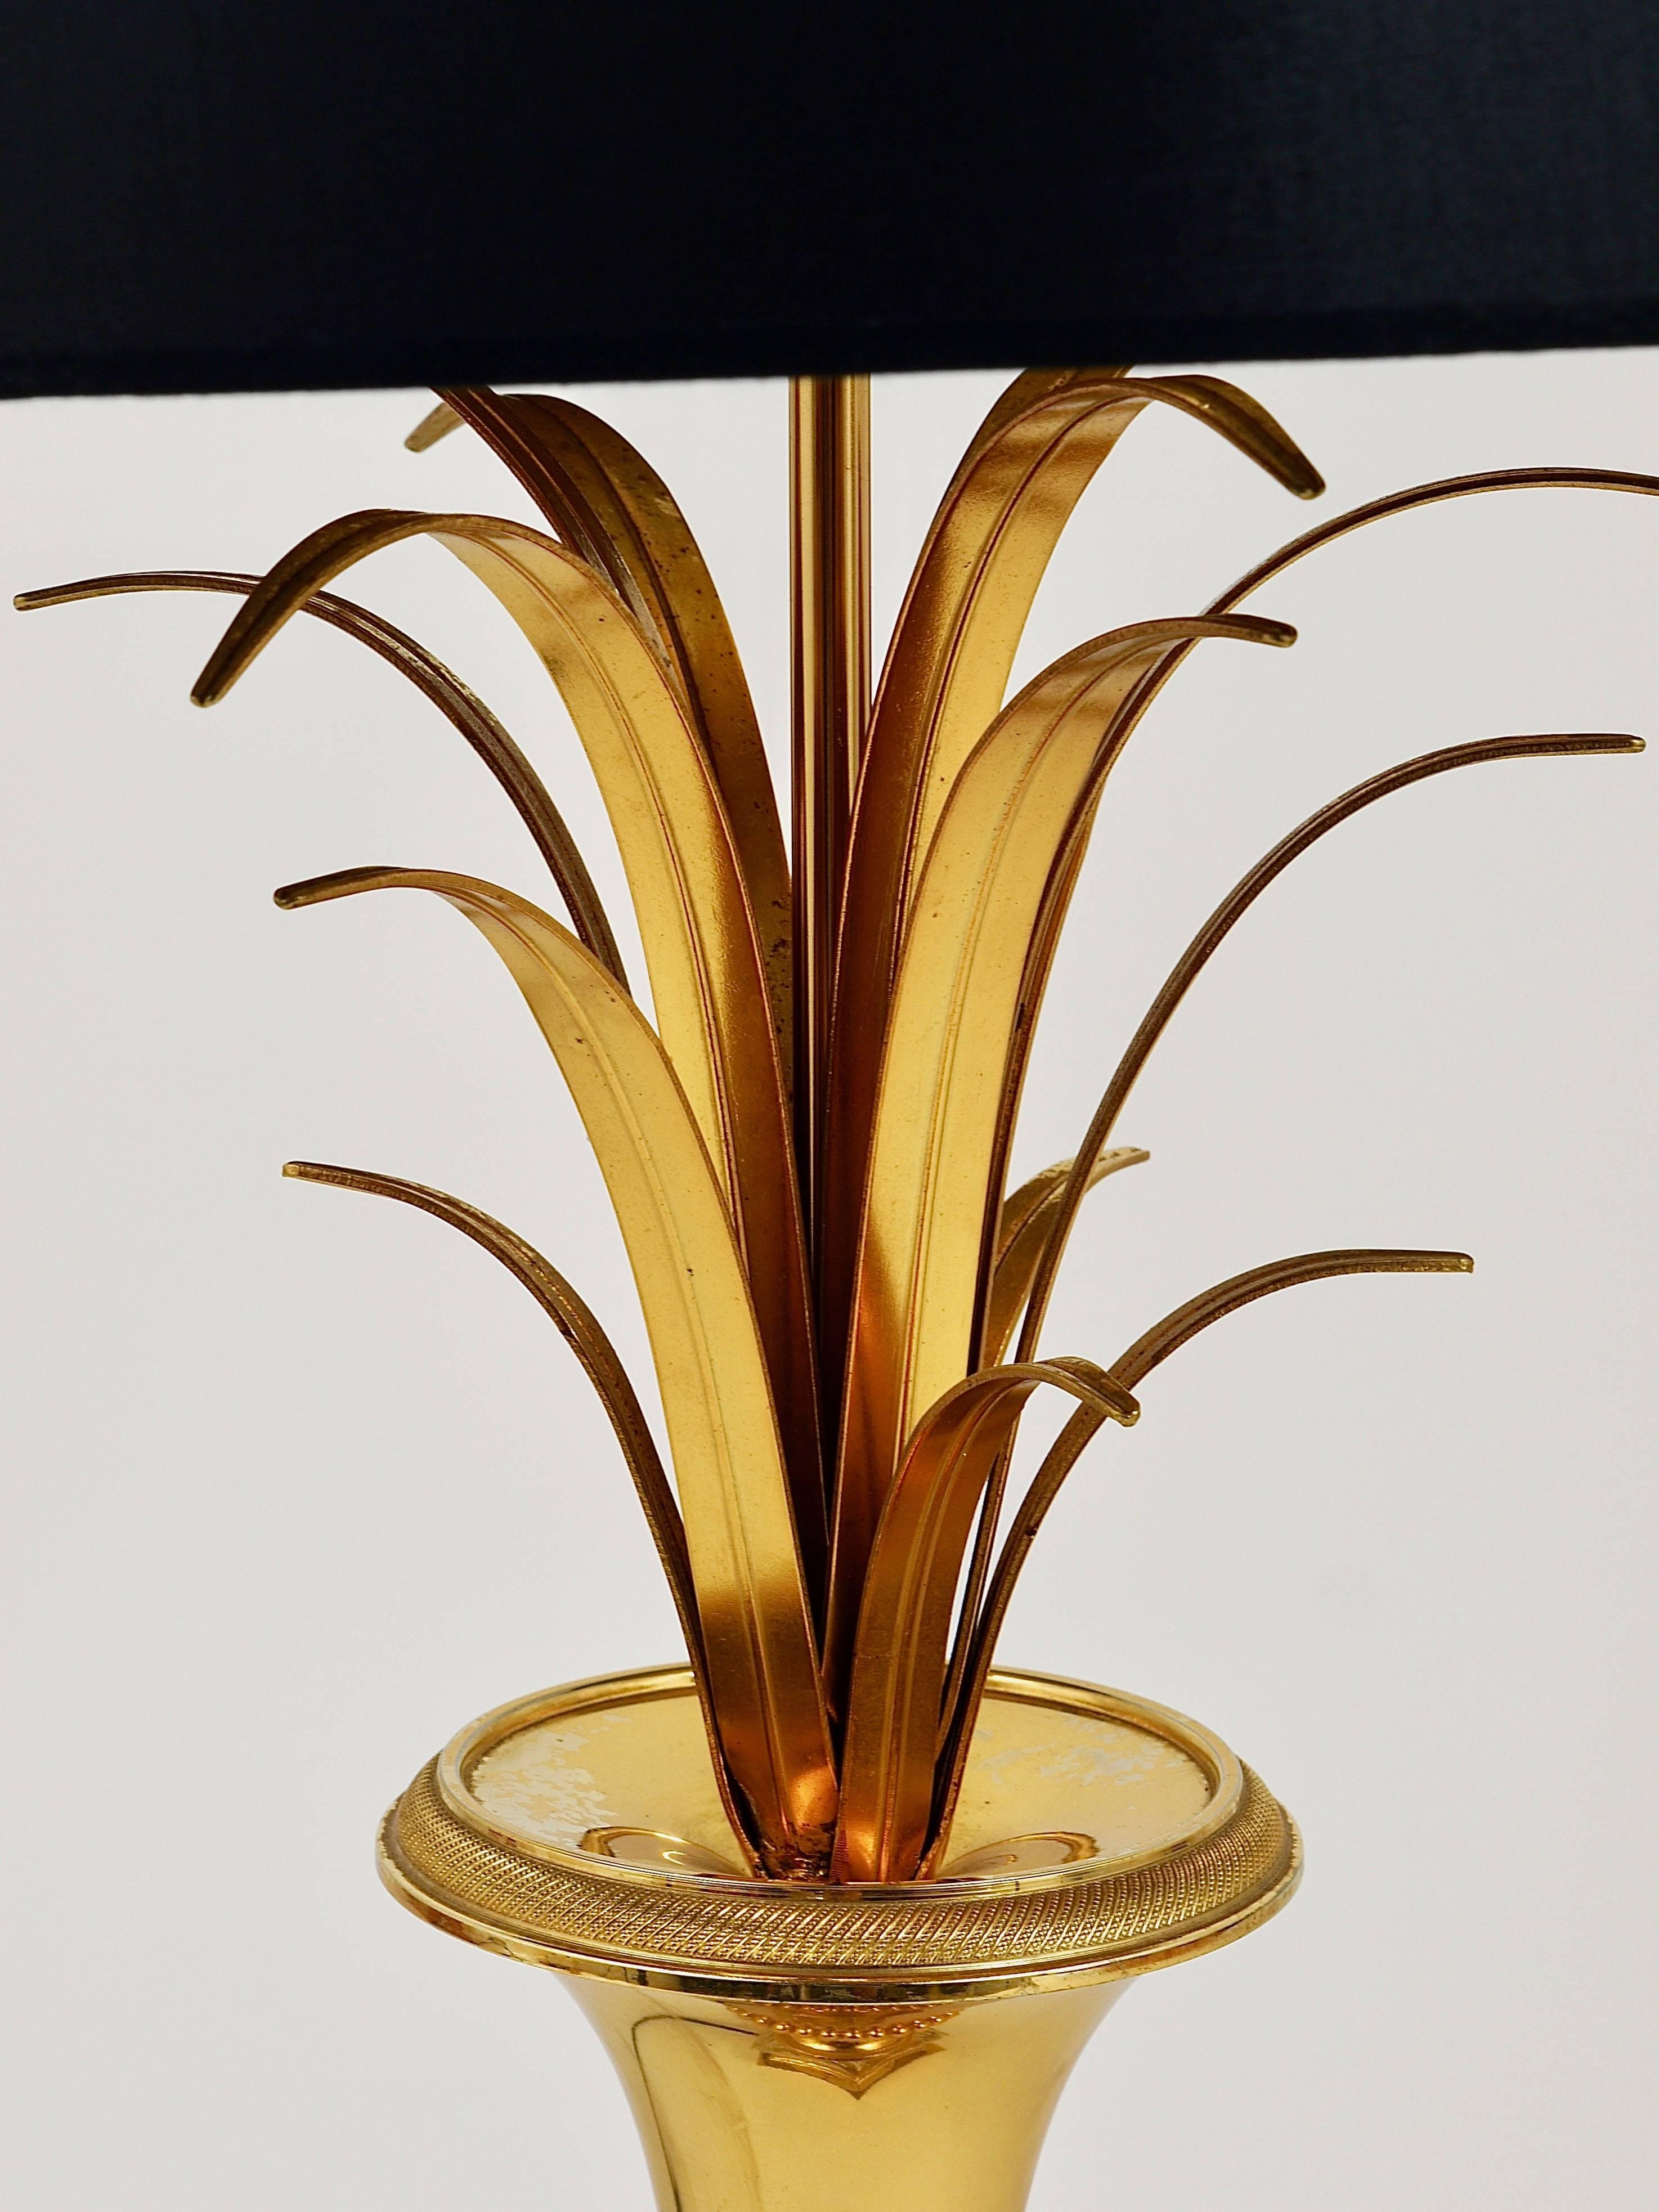 20th Century Hollywood Regency Pineapple Leaf Gilt Brass and Glass Table Lamp, France, 1970s For Sale